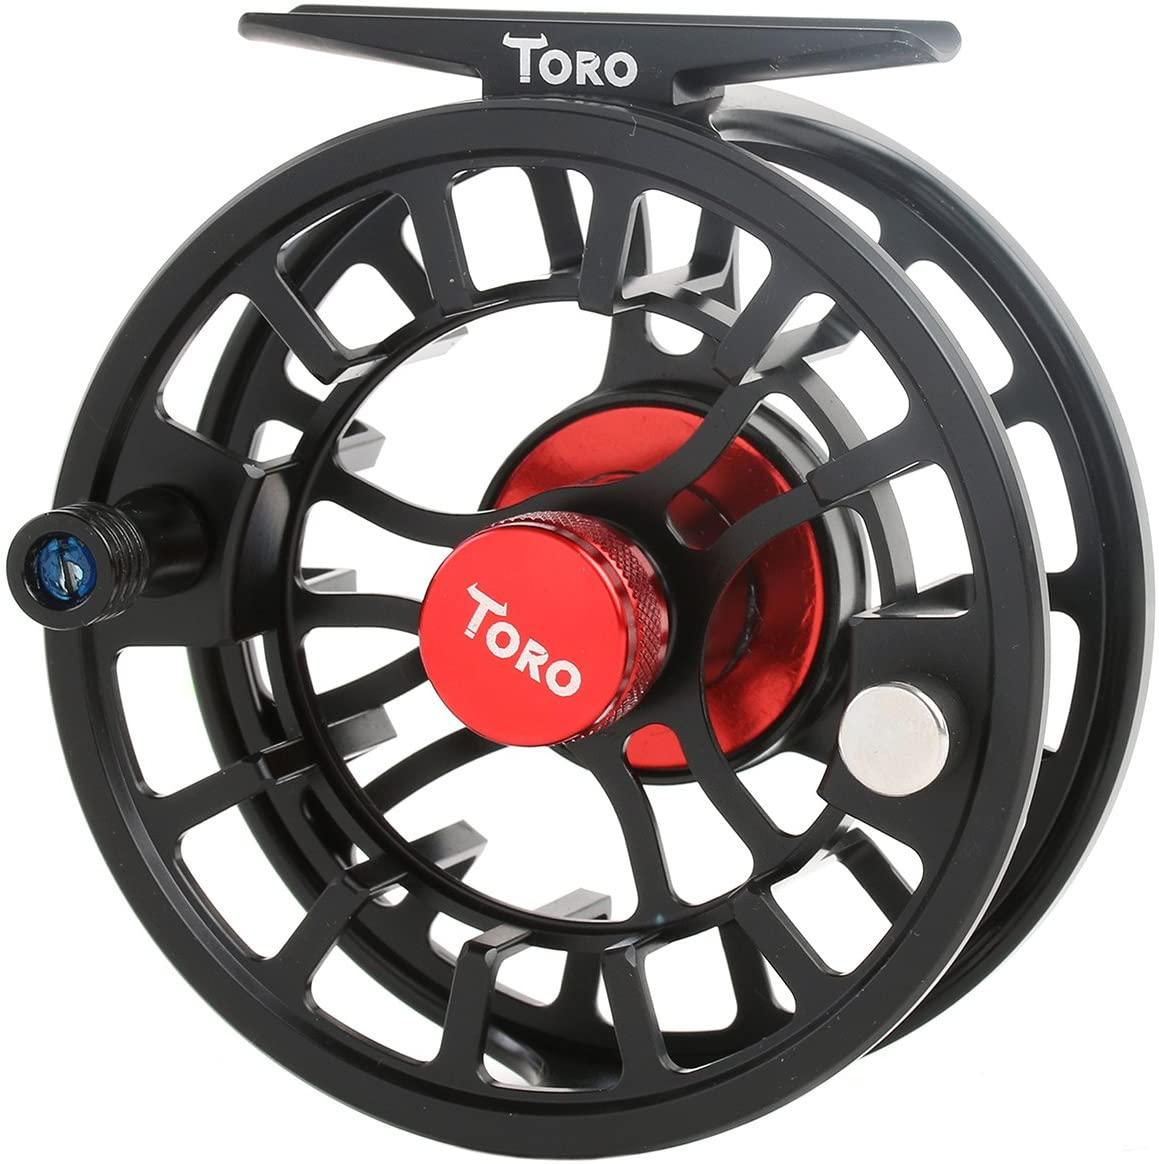 Best on Budget - 4 weight fly reel - Maxcatch Toro Series Fly Fishing Reel review